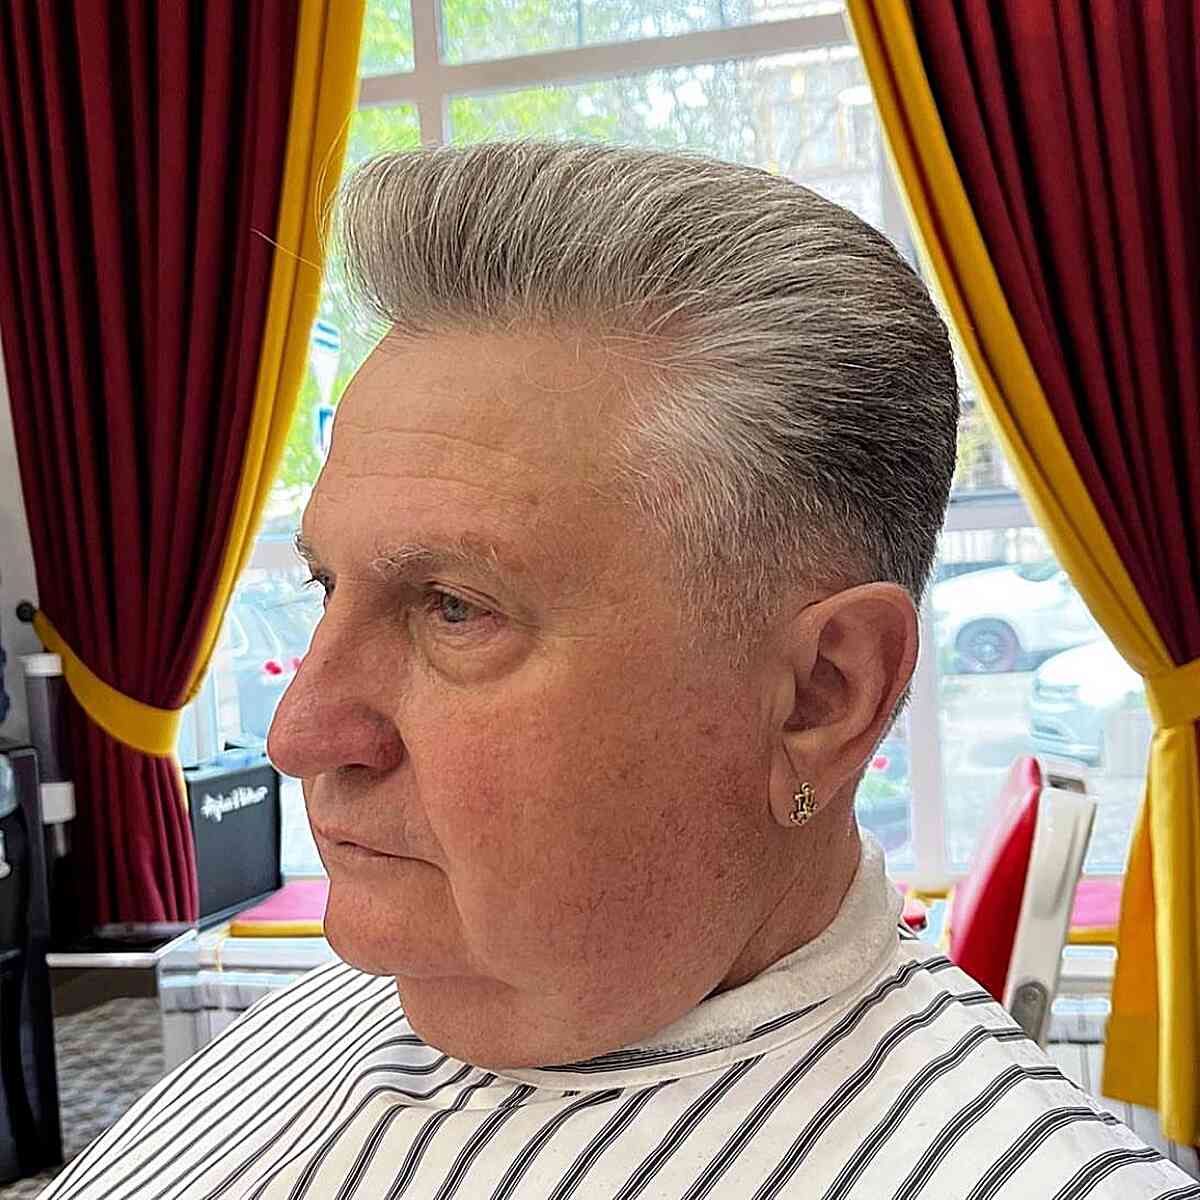 Salt and Pepper Pomp for Senior Men with short hair and coarse texture